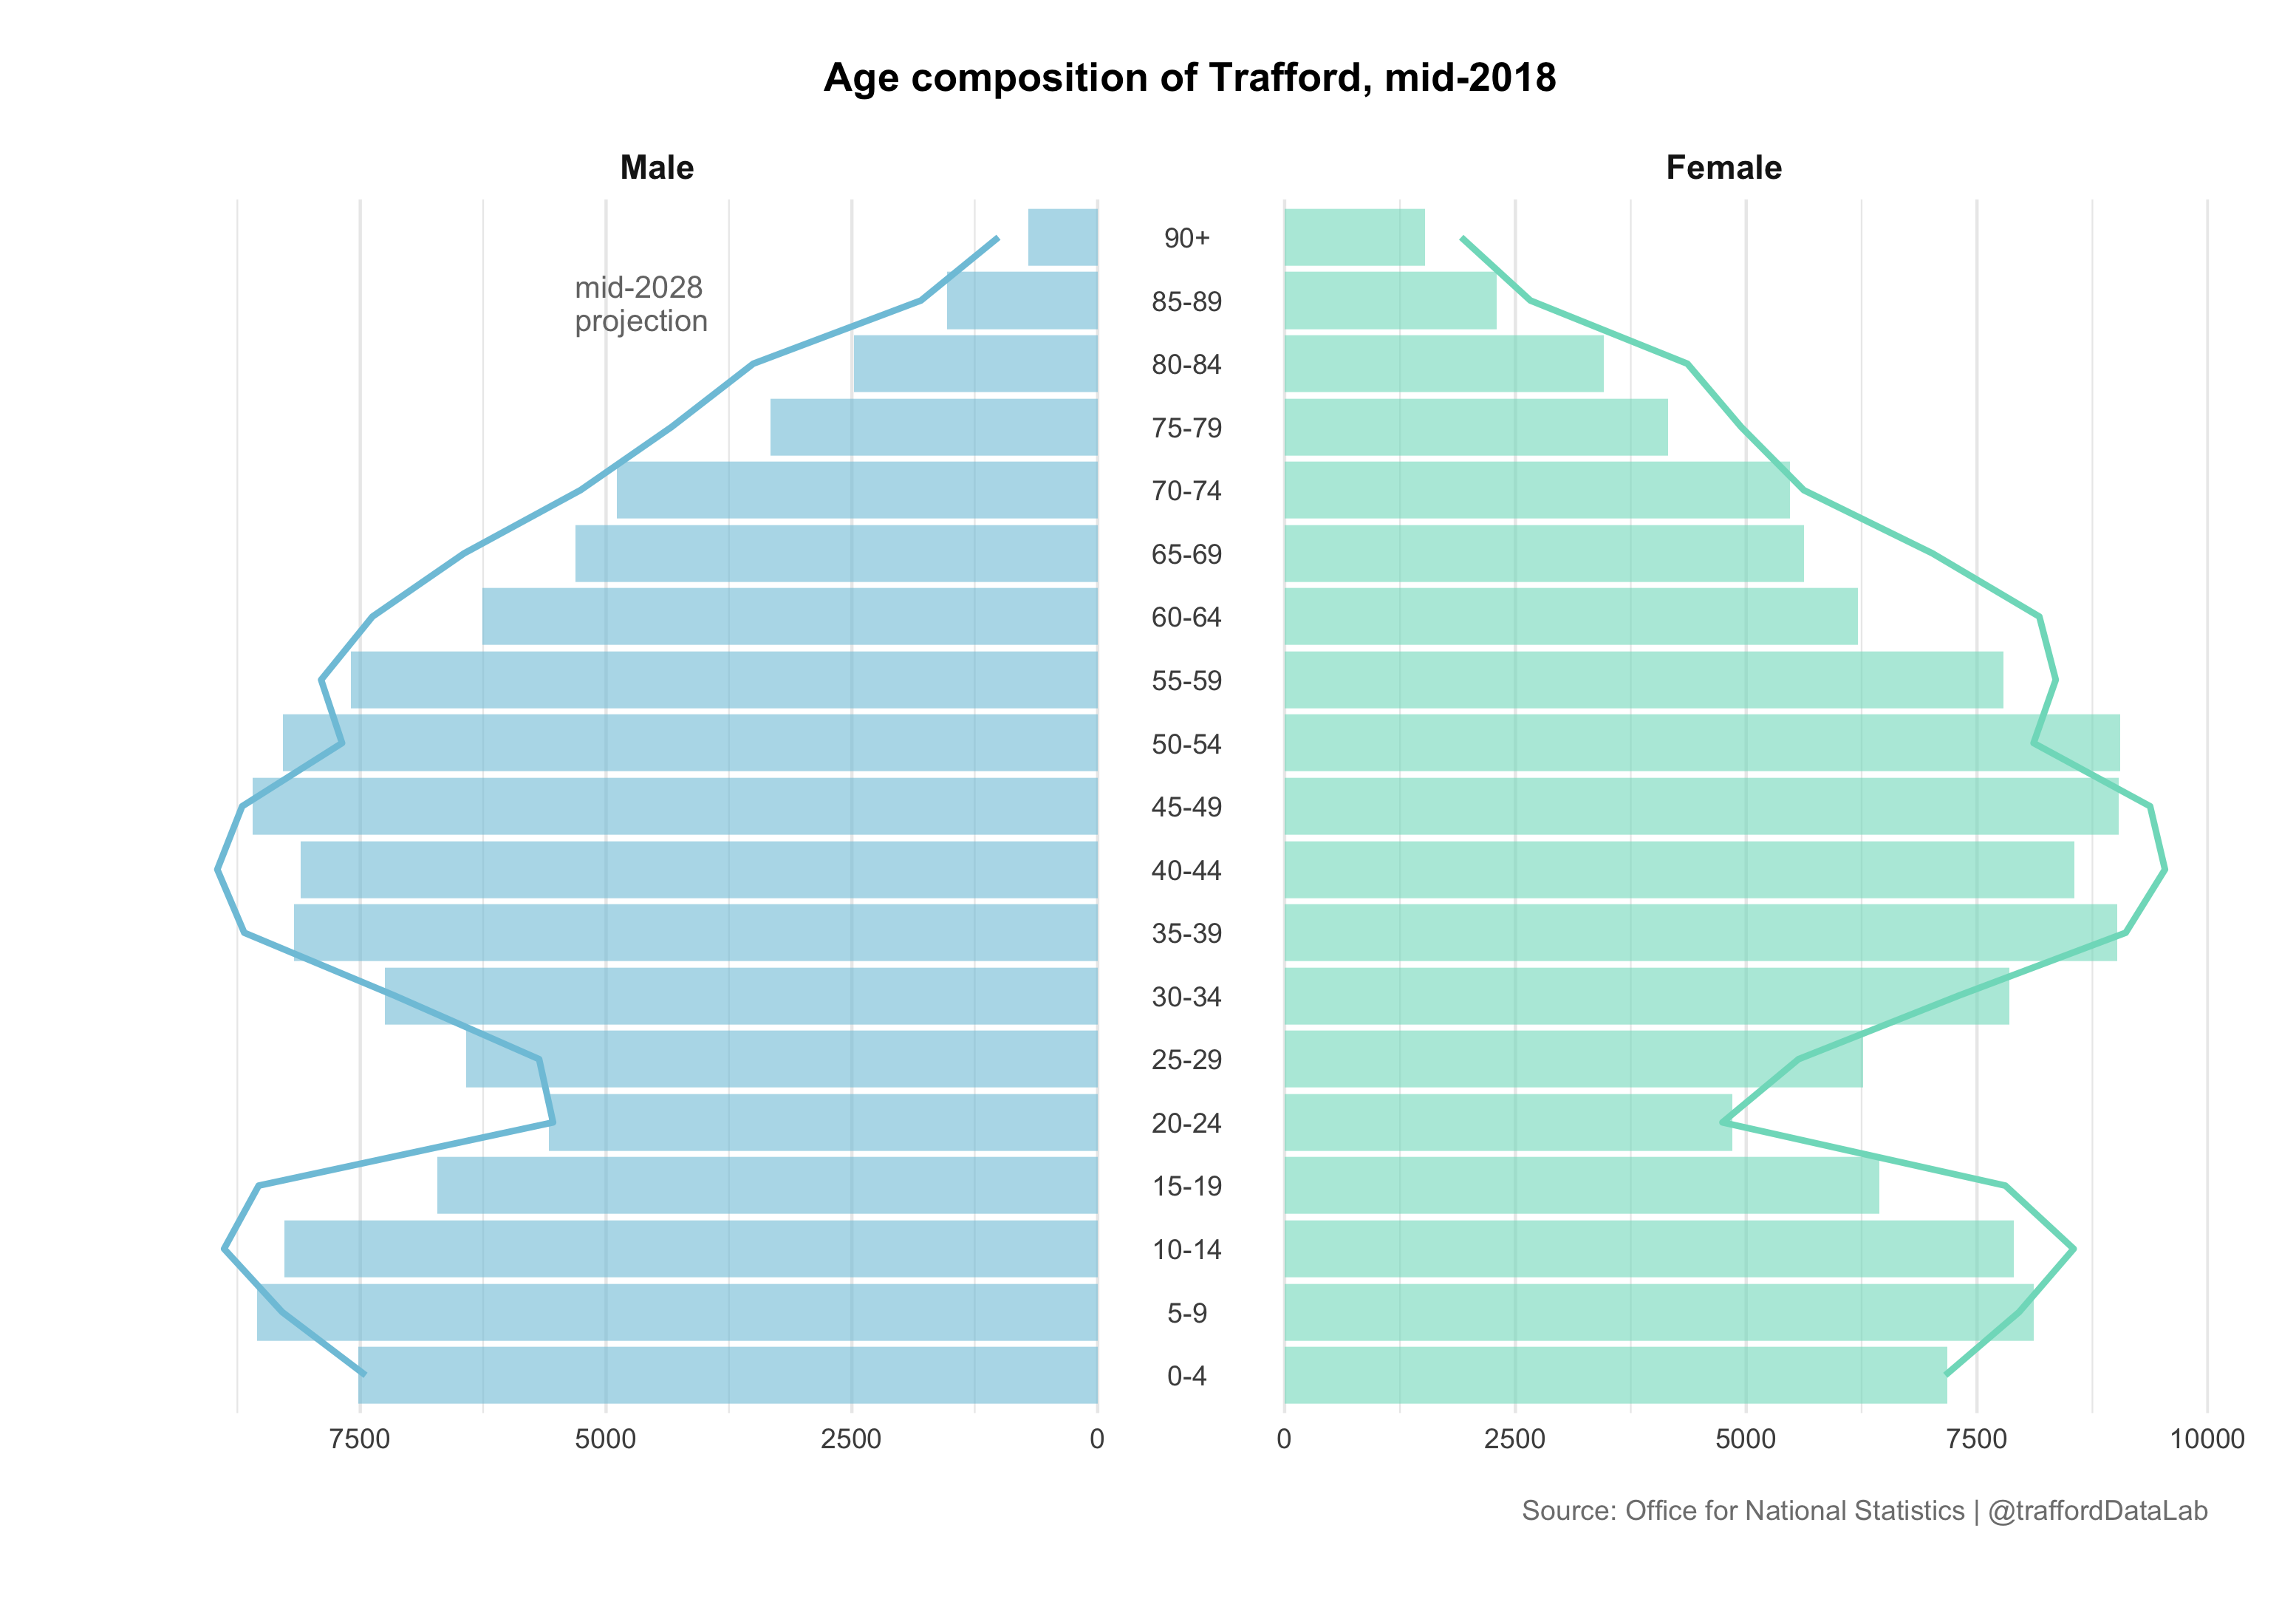 Age composition of Trafford from mid-2018 by gender and age band with mid-2028 projections.